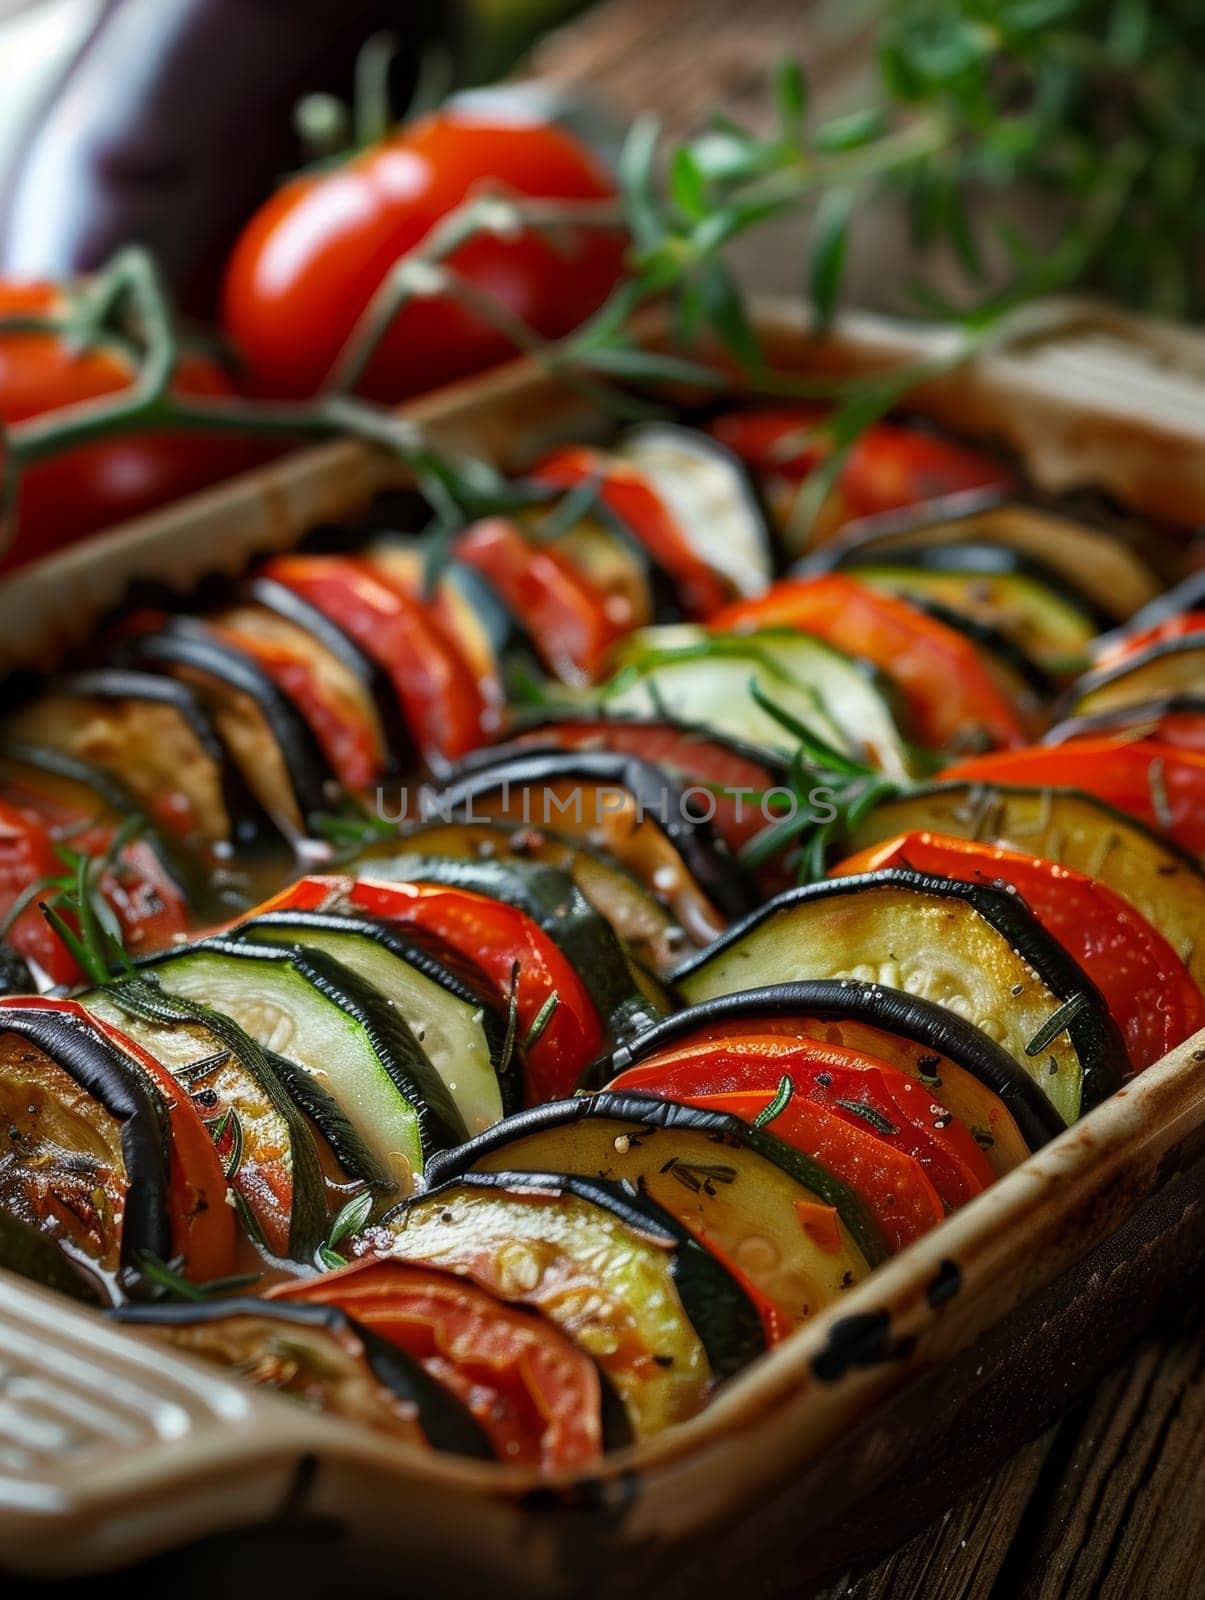 Delicious homemade French ratatouille in a rustic baking dish, showcasing the vibrant colors and textures of fresh zucchini slices. A Mediterranean vegetable dish that's healthy and full of flavor. by sfinks